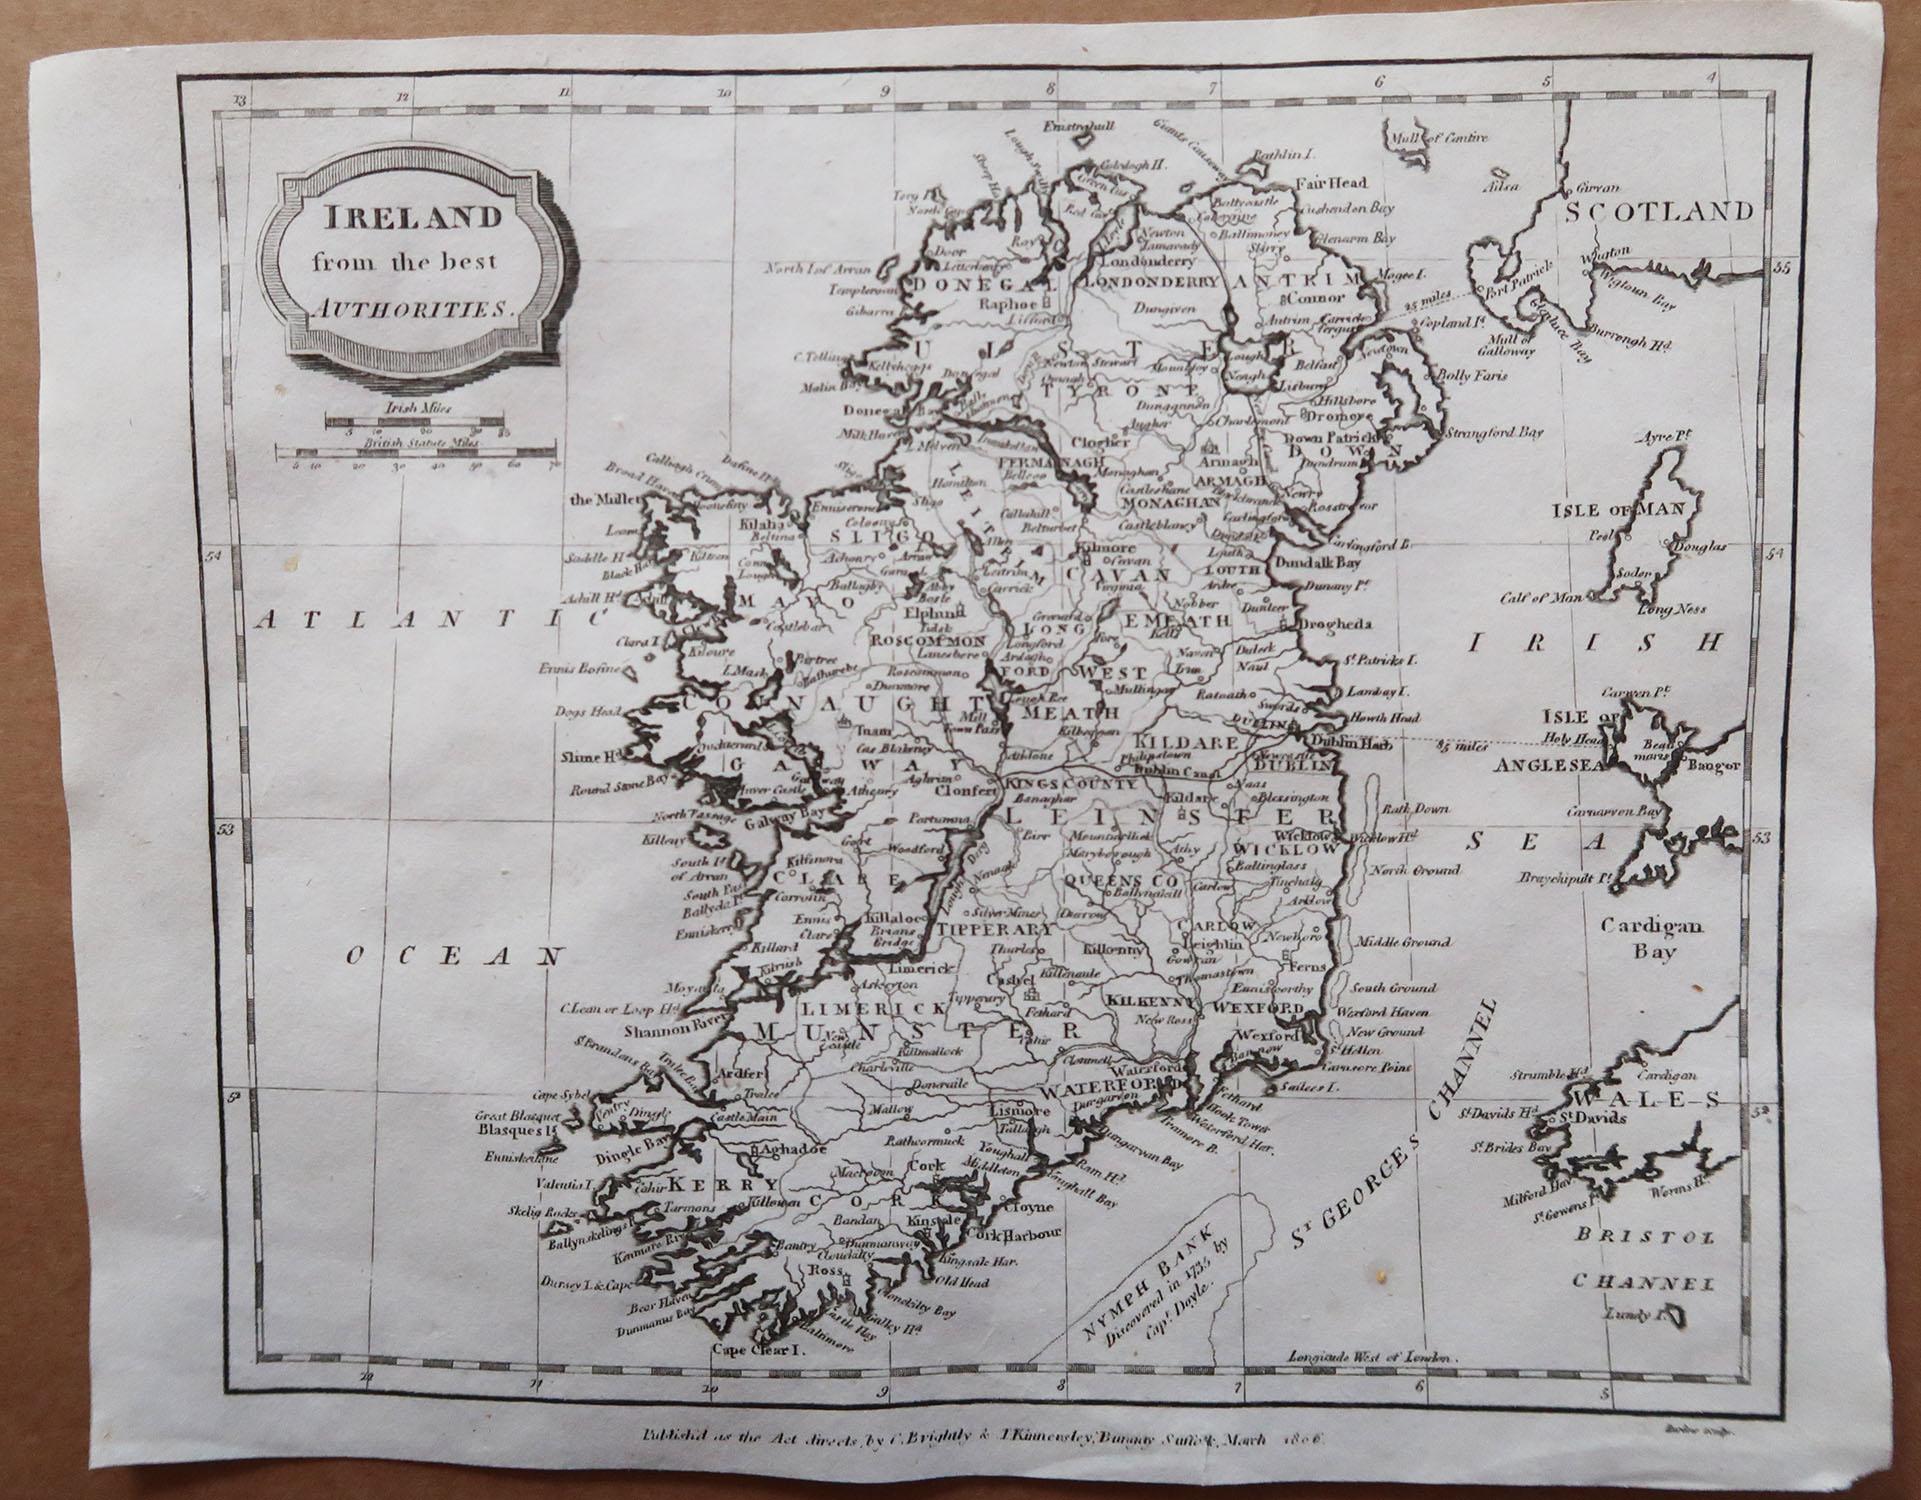 Other Original Antique Map of Ireland, Engraved by Barlow, Dated 1806